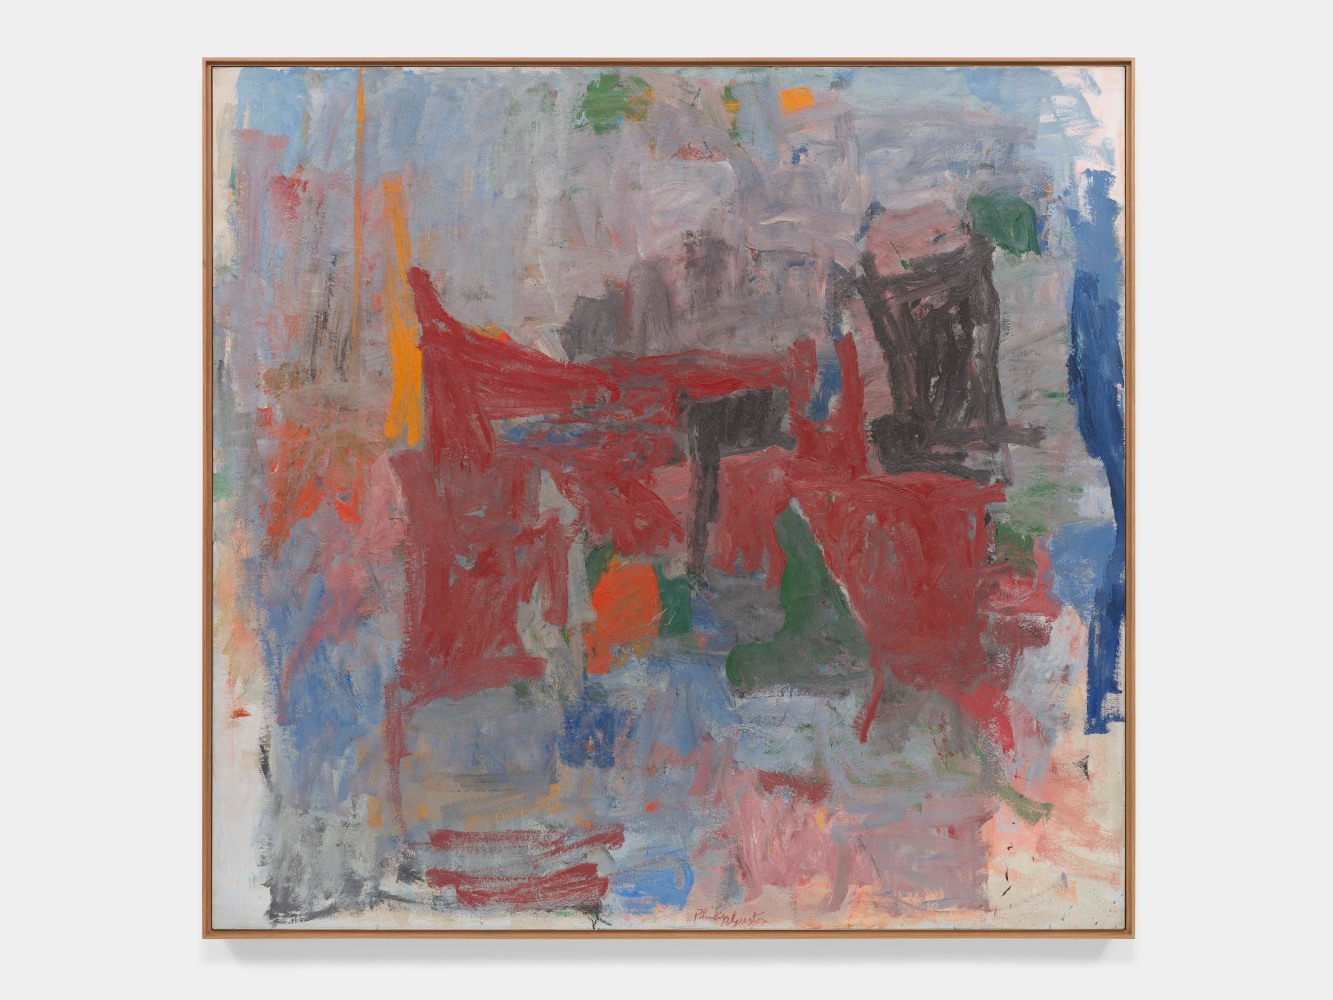 Philip Guston

Branch

1956-58

oil on canvas

71 7/8 x 76 inches (182.6 x 193 cm)